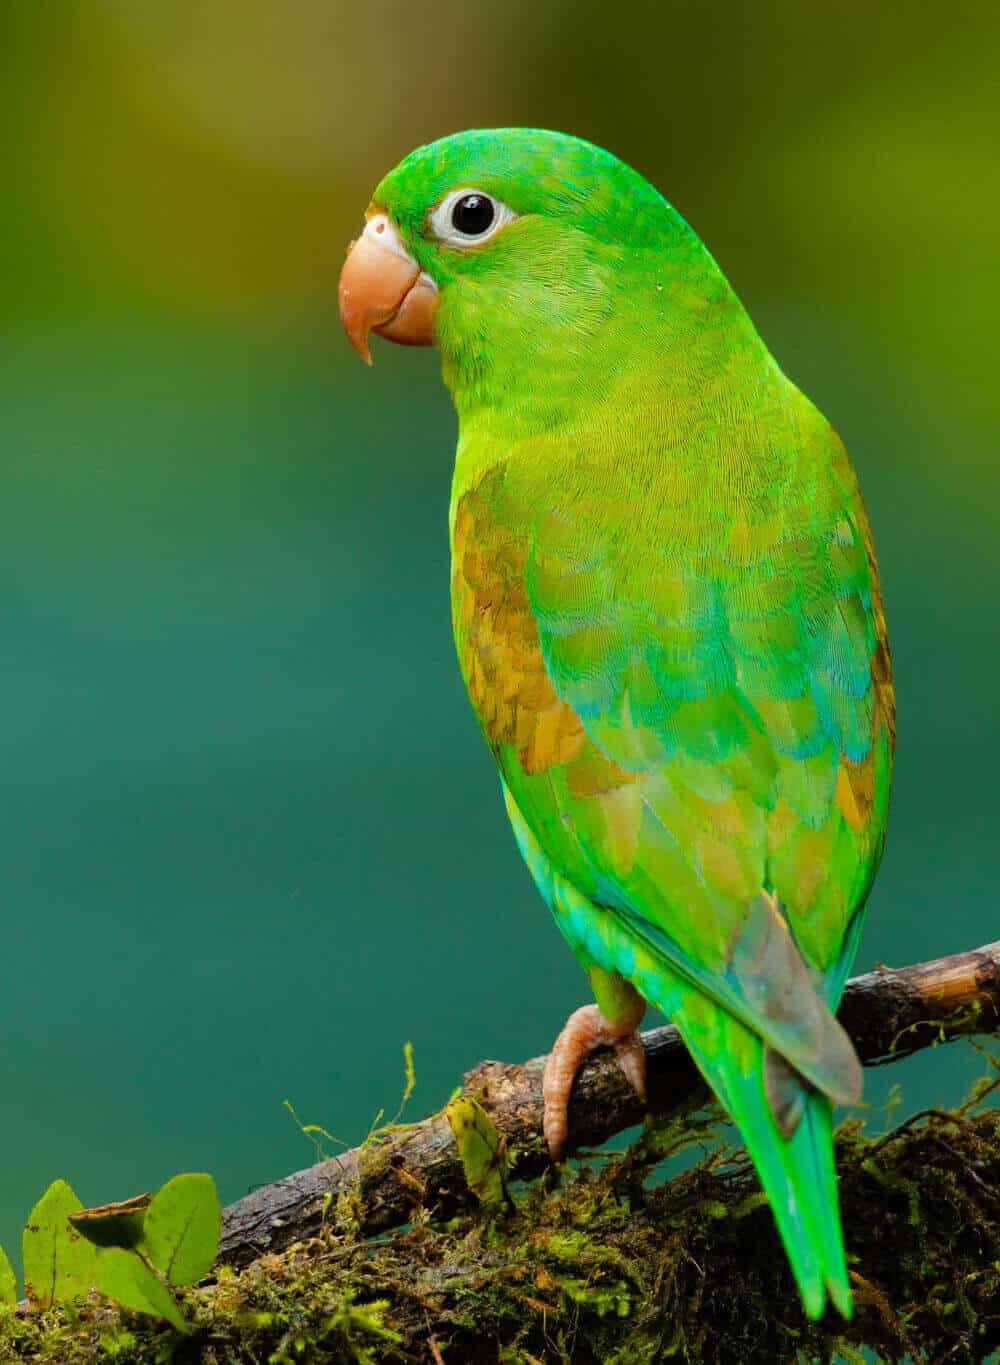 Small green parrot perched on branch